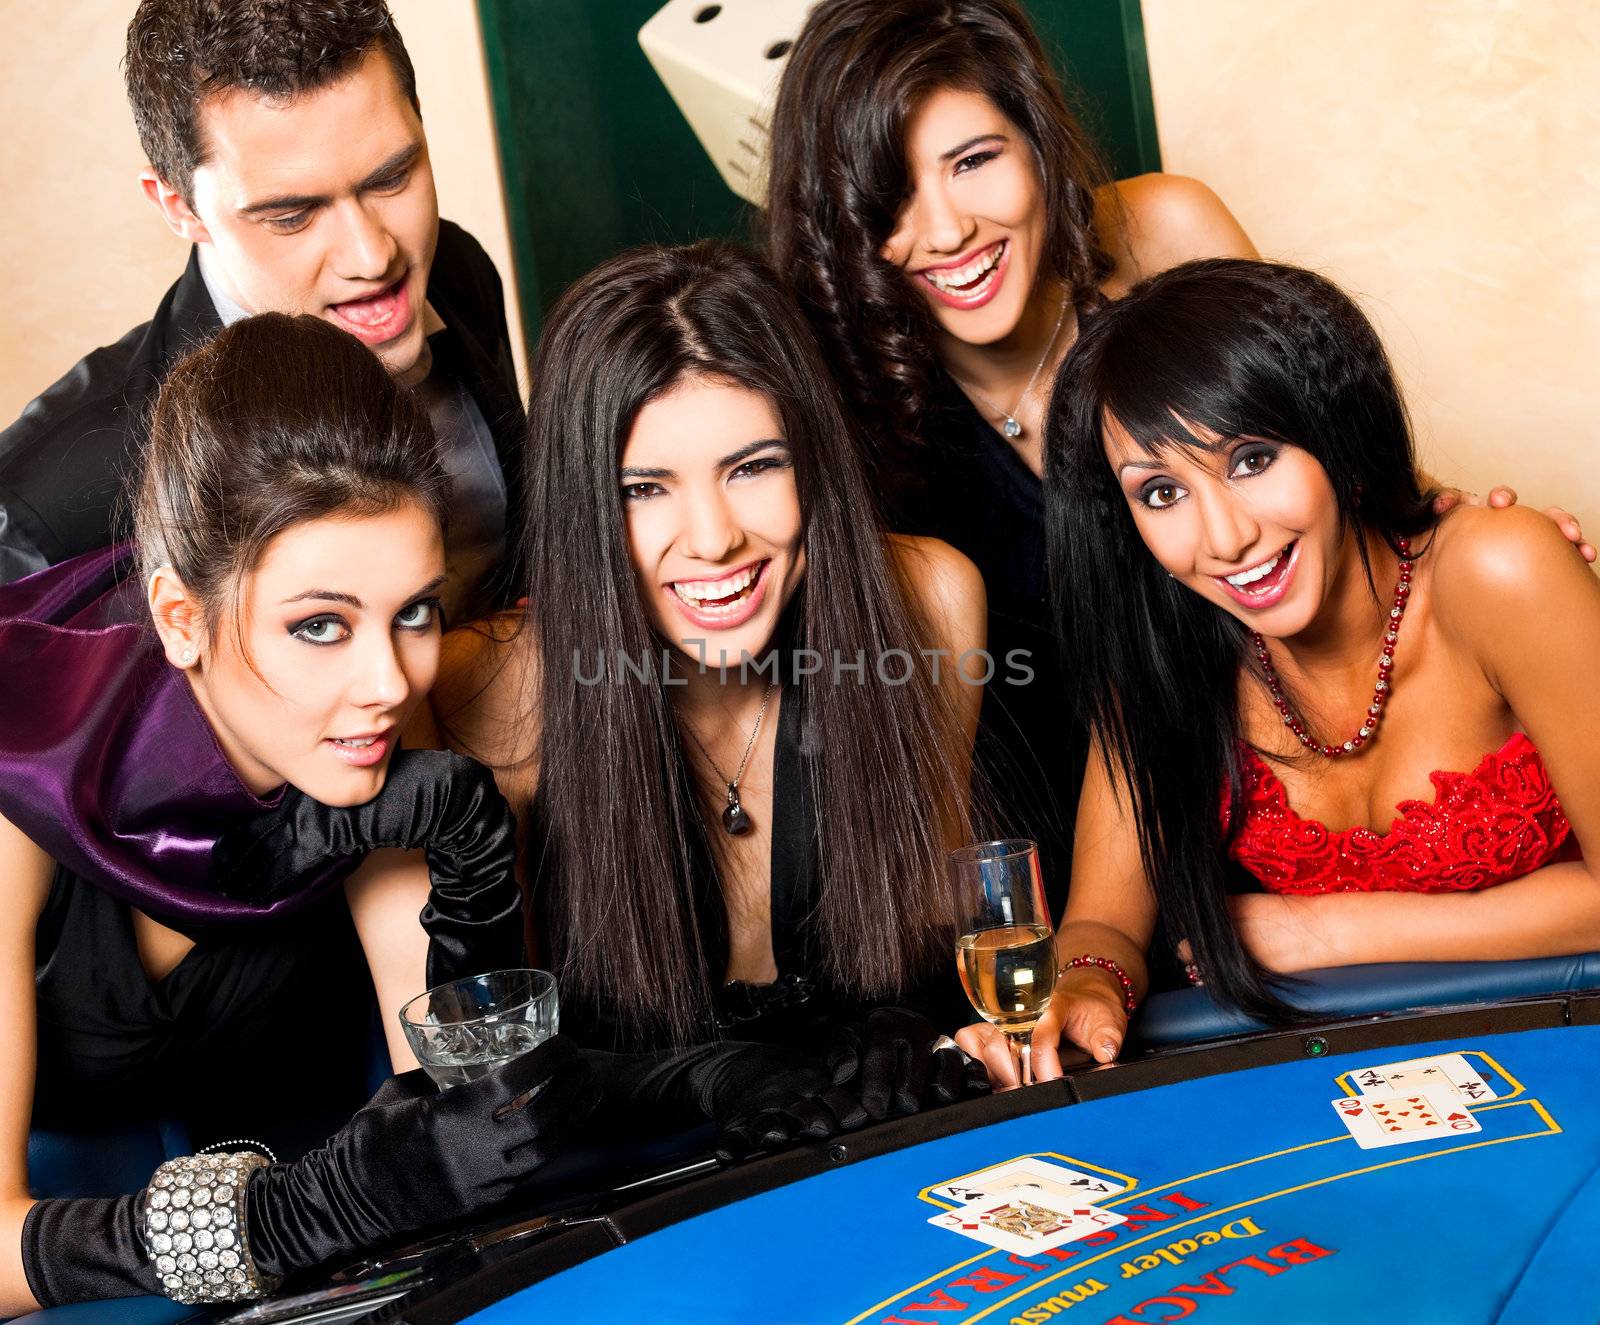 Group of young happy people in casino smiling behind black jack table